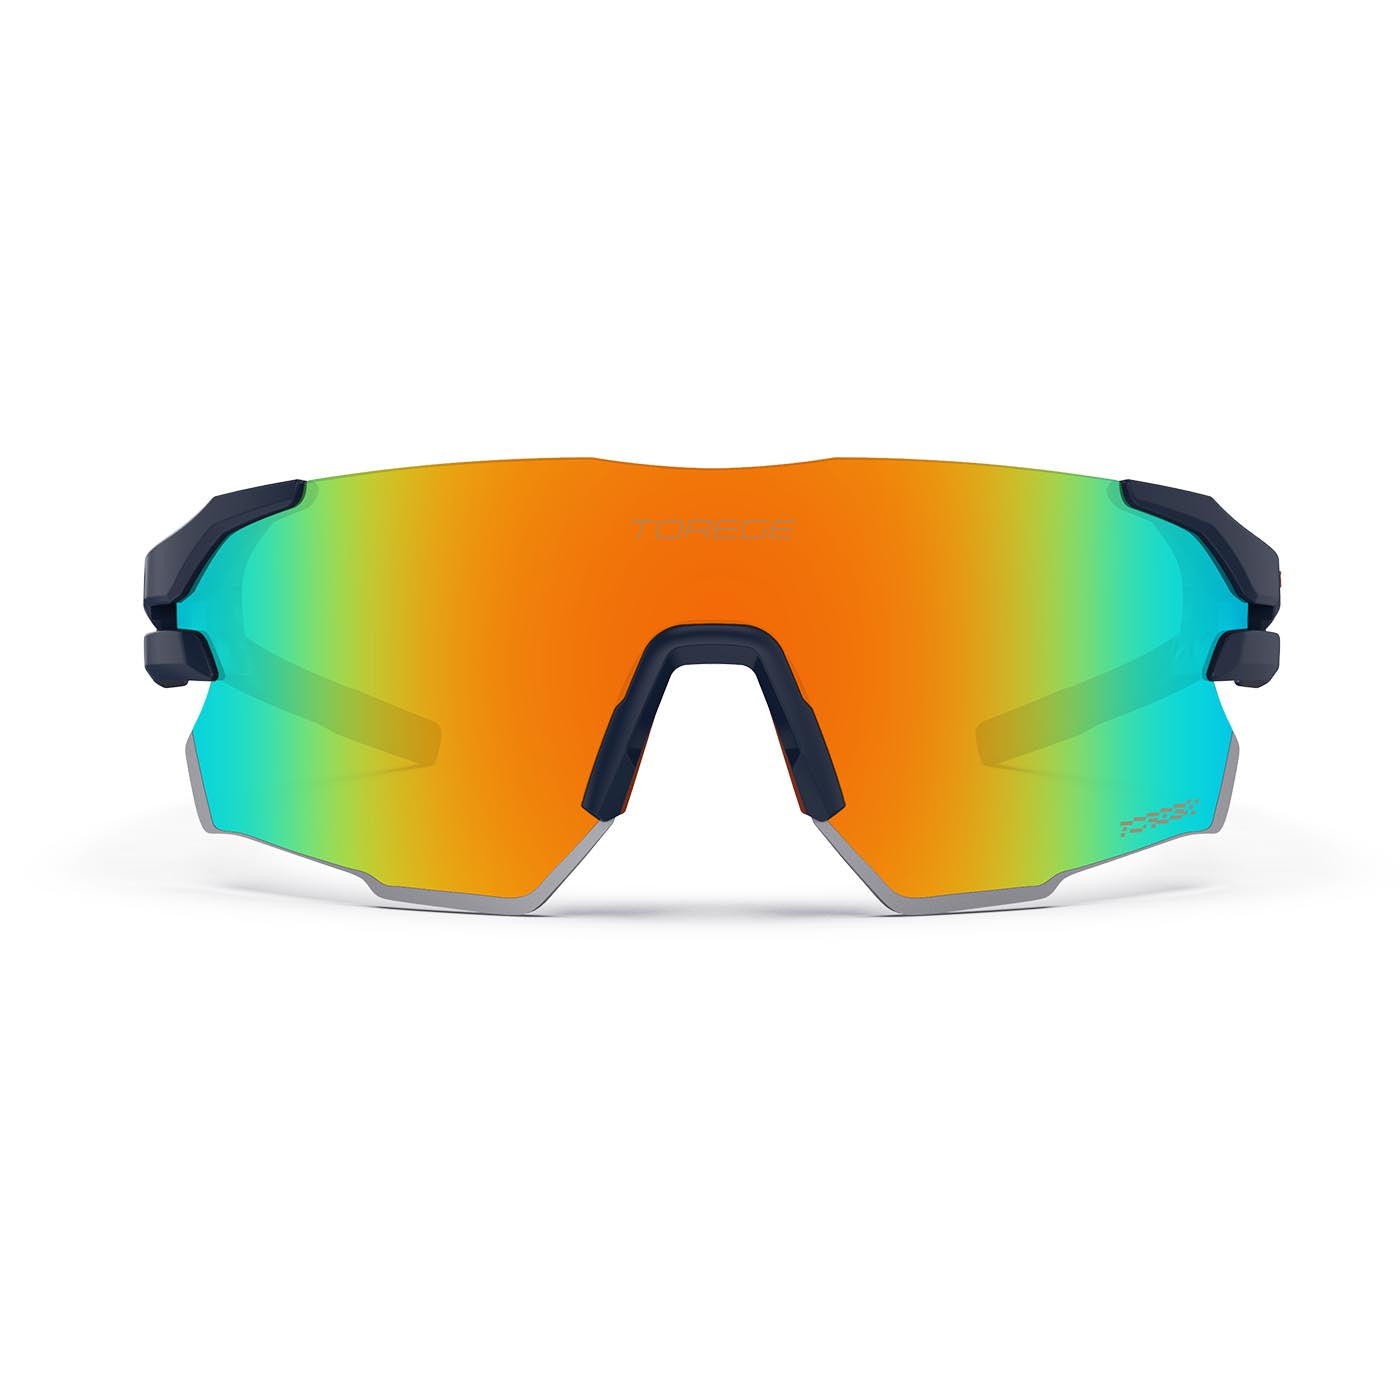 Tempation Ultra Sunlight Golf, Women and Sport for Matte & With - Lens Running Warranty for Lightweight Men - Frame and Sunglasses Wraparound Cycling, Perfect Blue Lifetime Fishing, Active Hiking, Orange